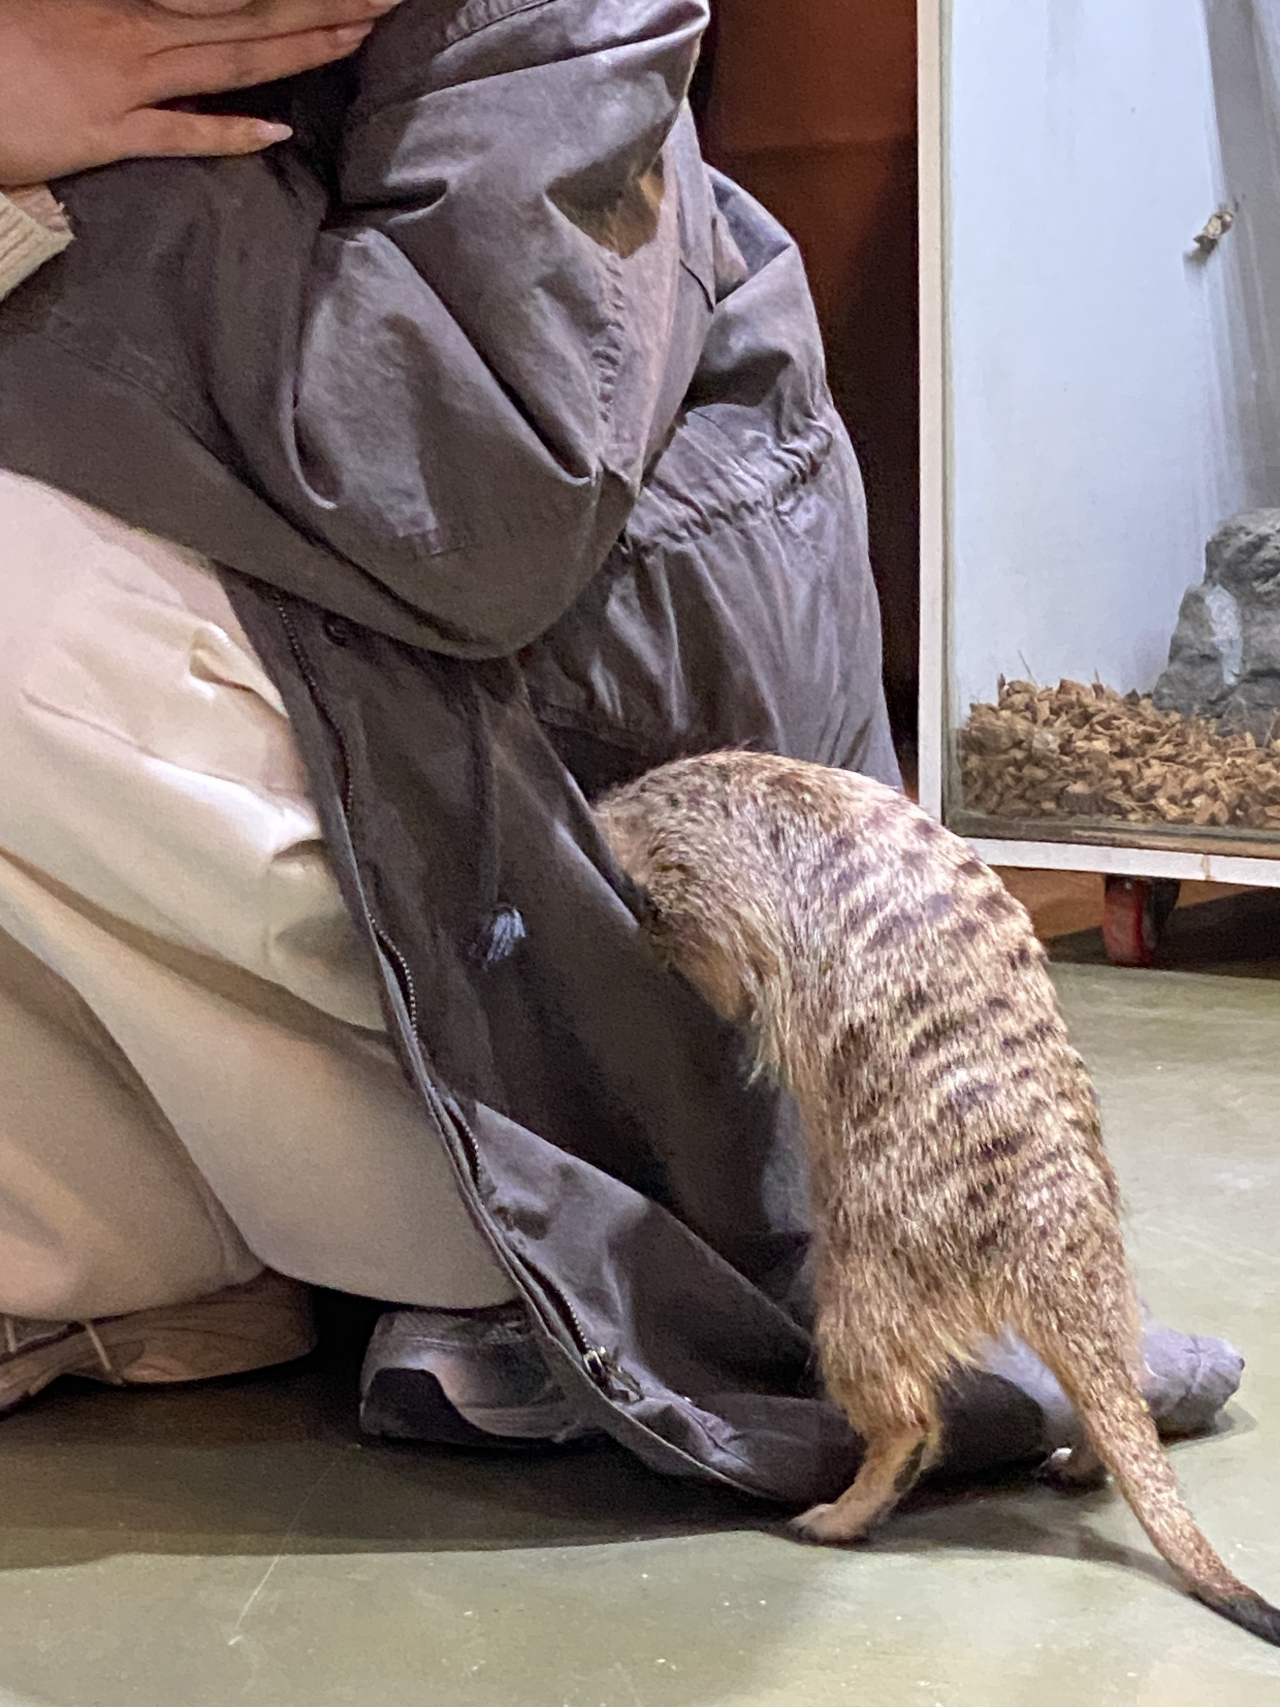 A meerkat rummages in a visitor's pocket. (Hwang Joo-young/The Korea Herald)